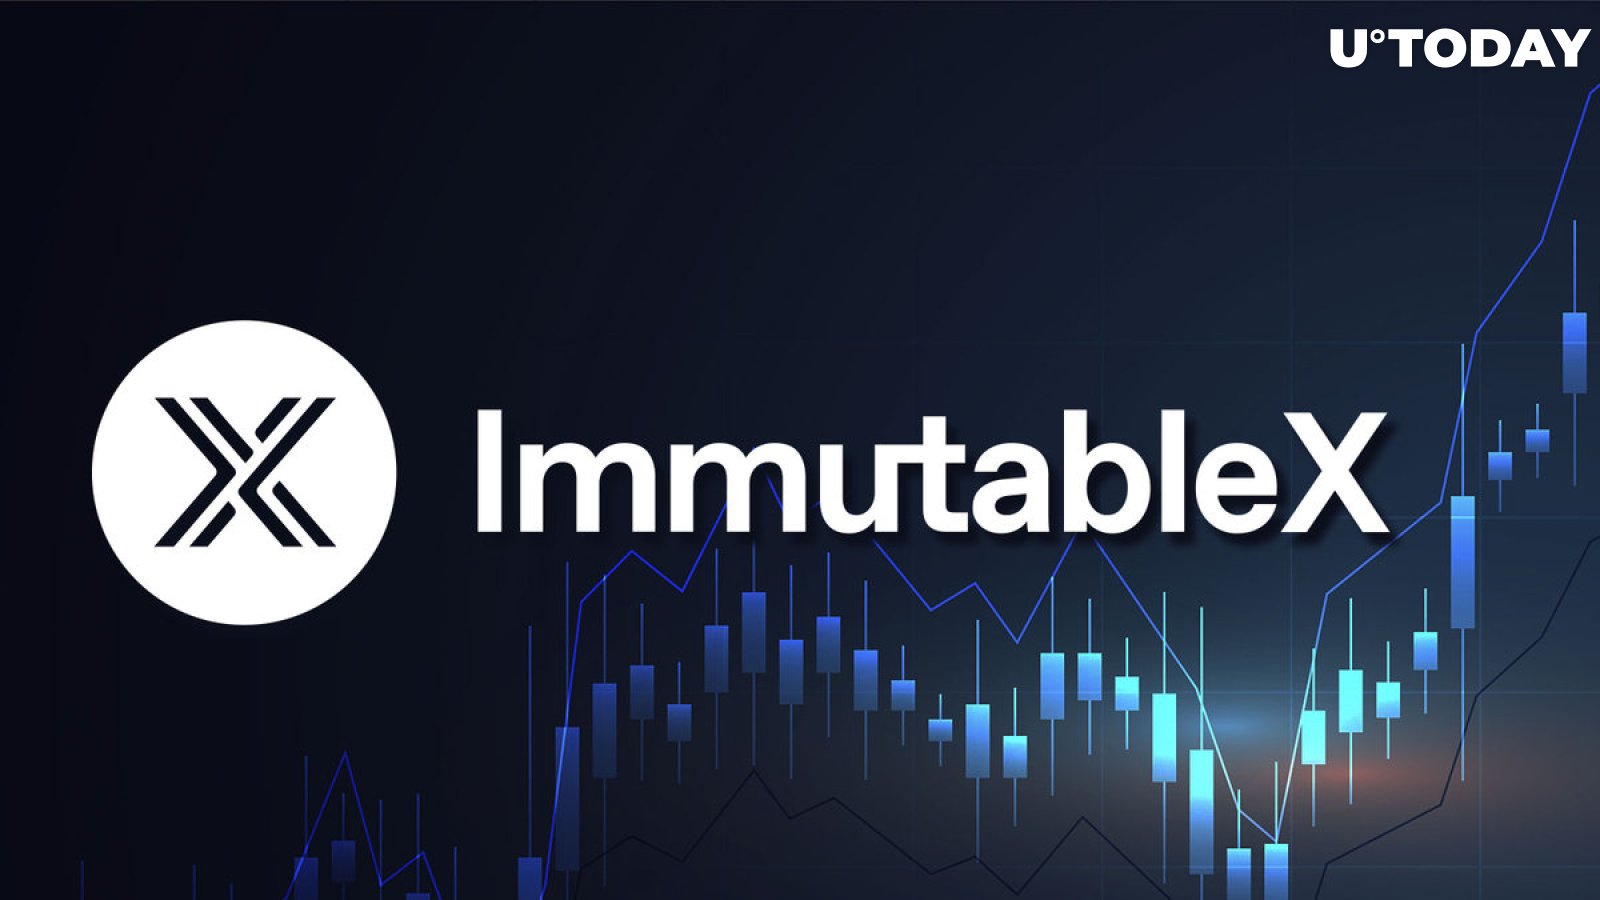 ImmutableX (IMX) Jumps 20%, Here's What's Driving Growth